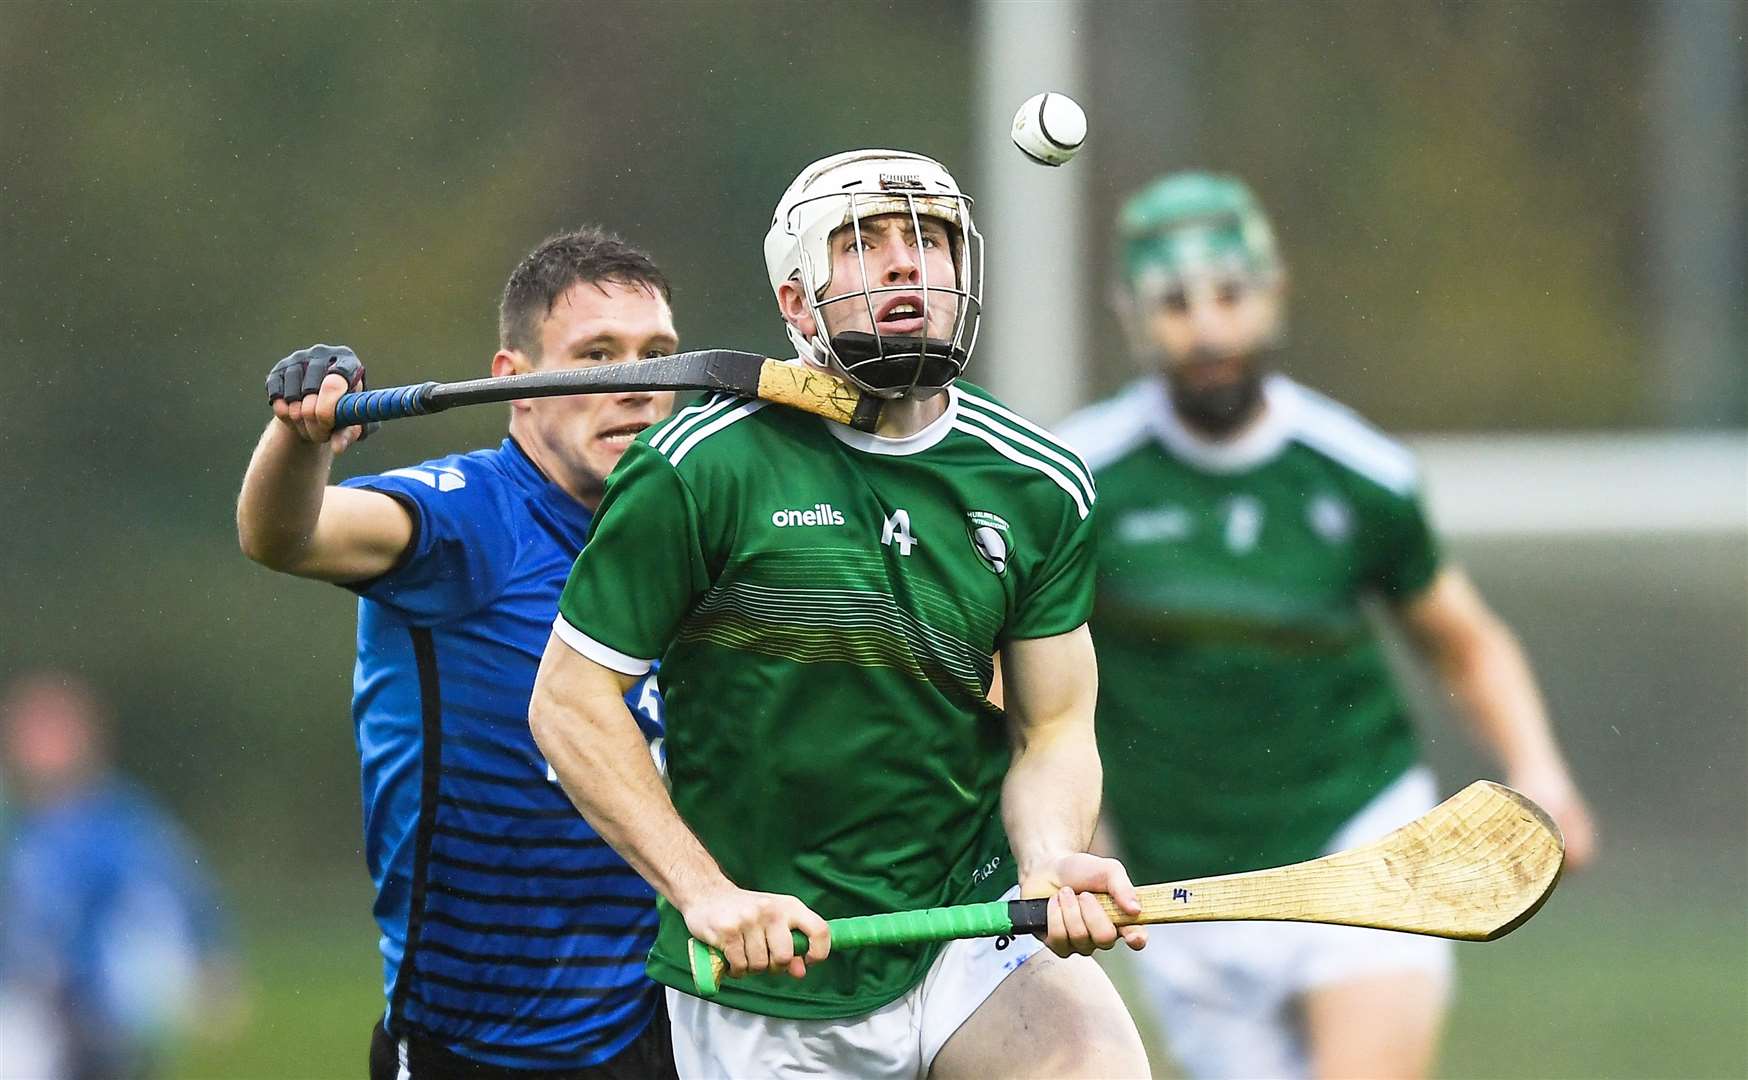 Shane McGovern of Ireland in action against Daniel Grieve of Scotland during the 2019 senior shinty-hurling international between Ireland and Scotland.